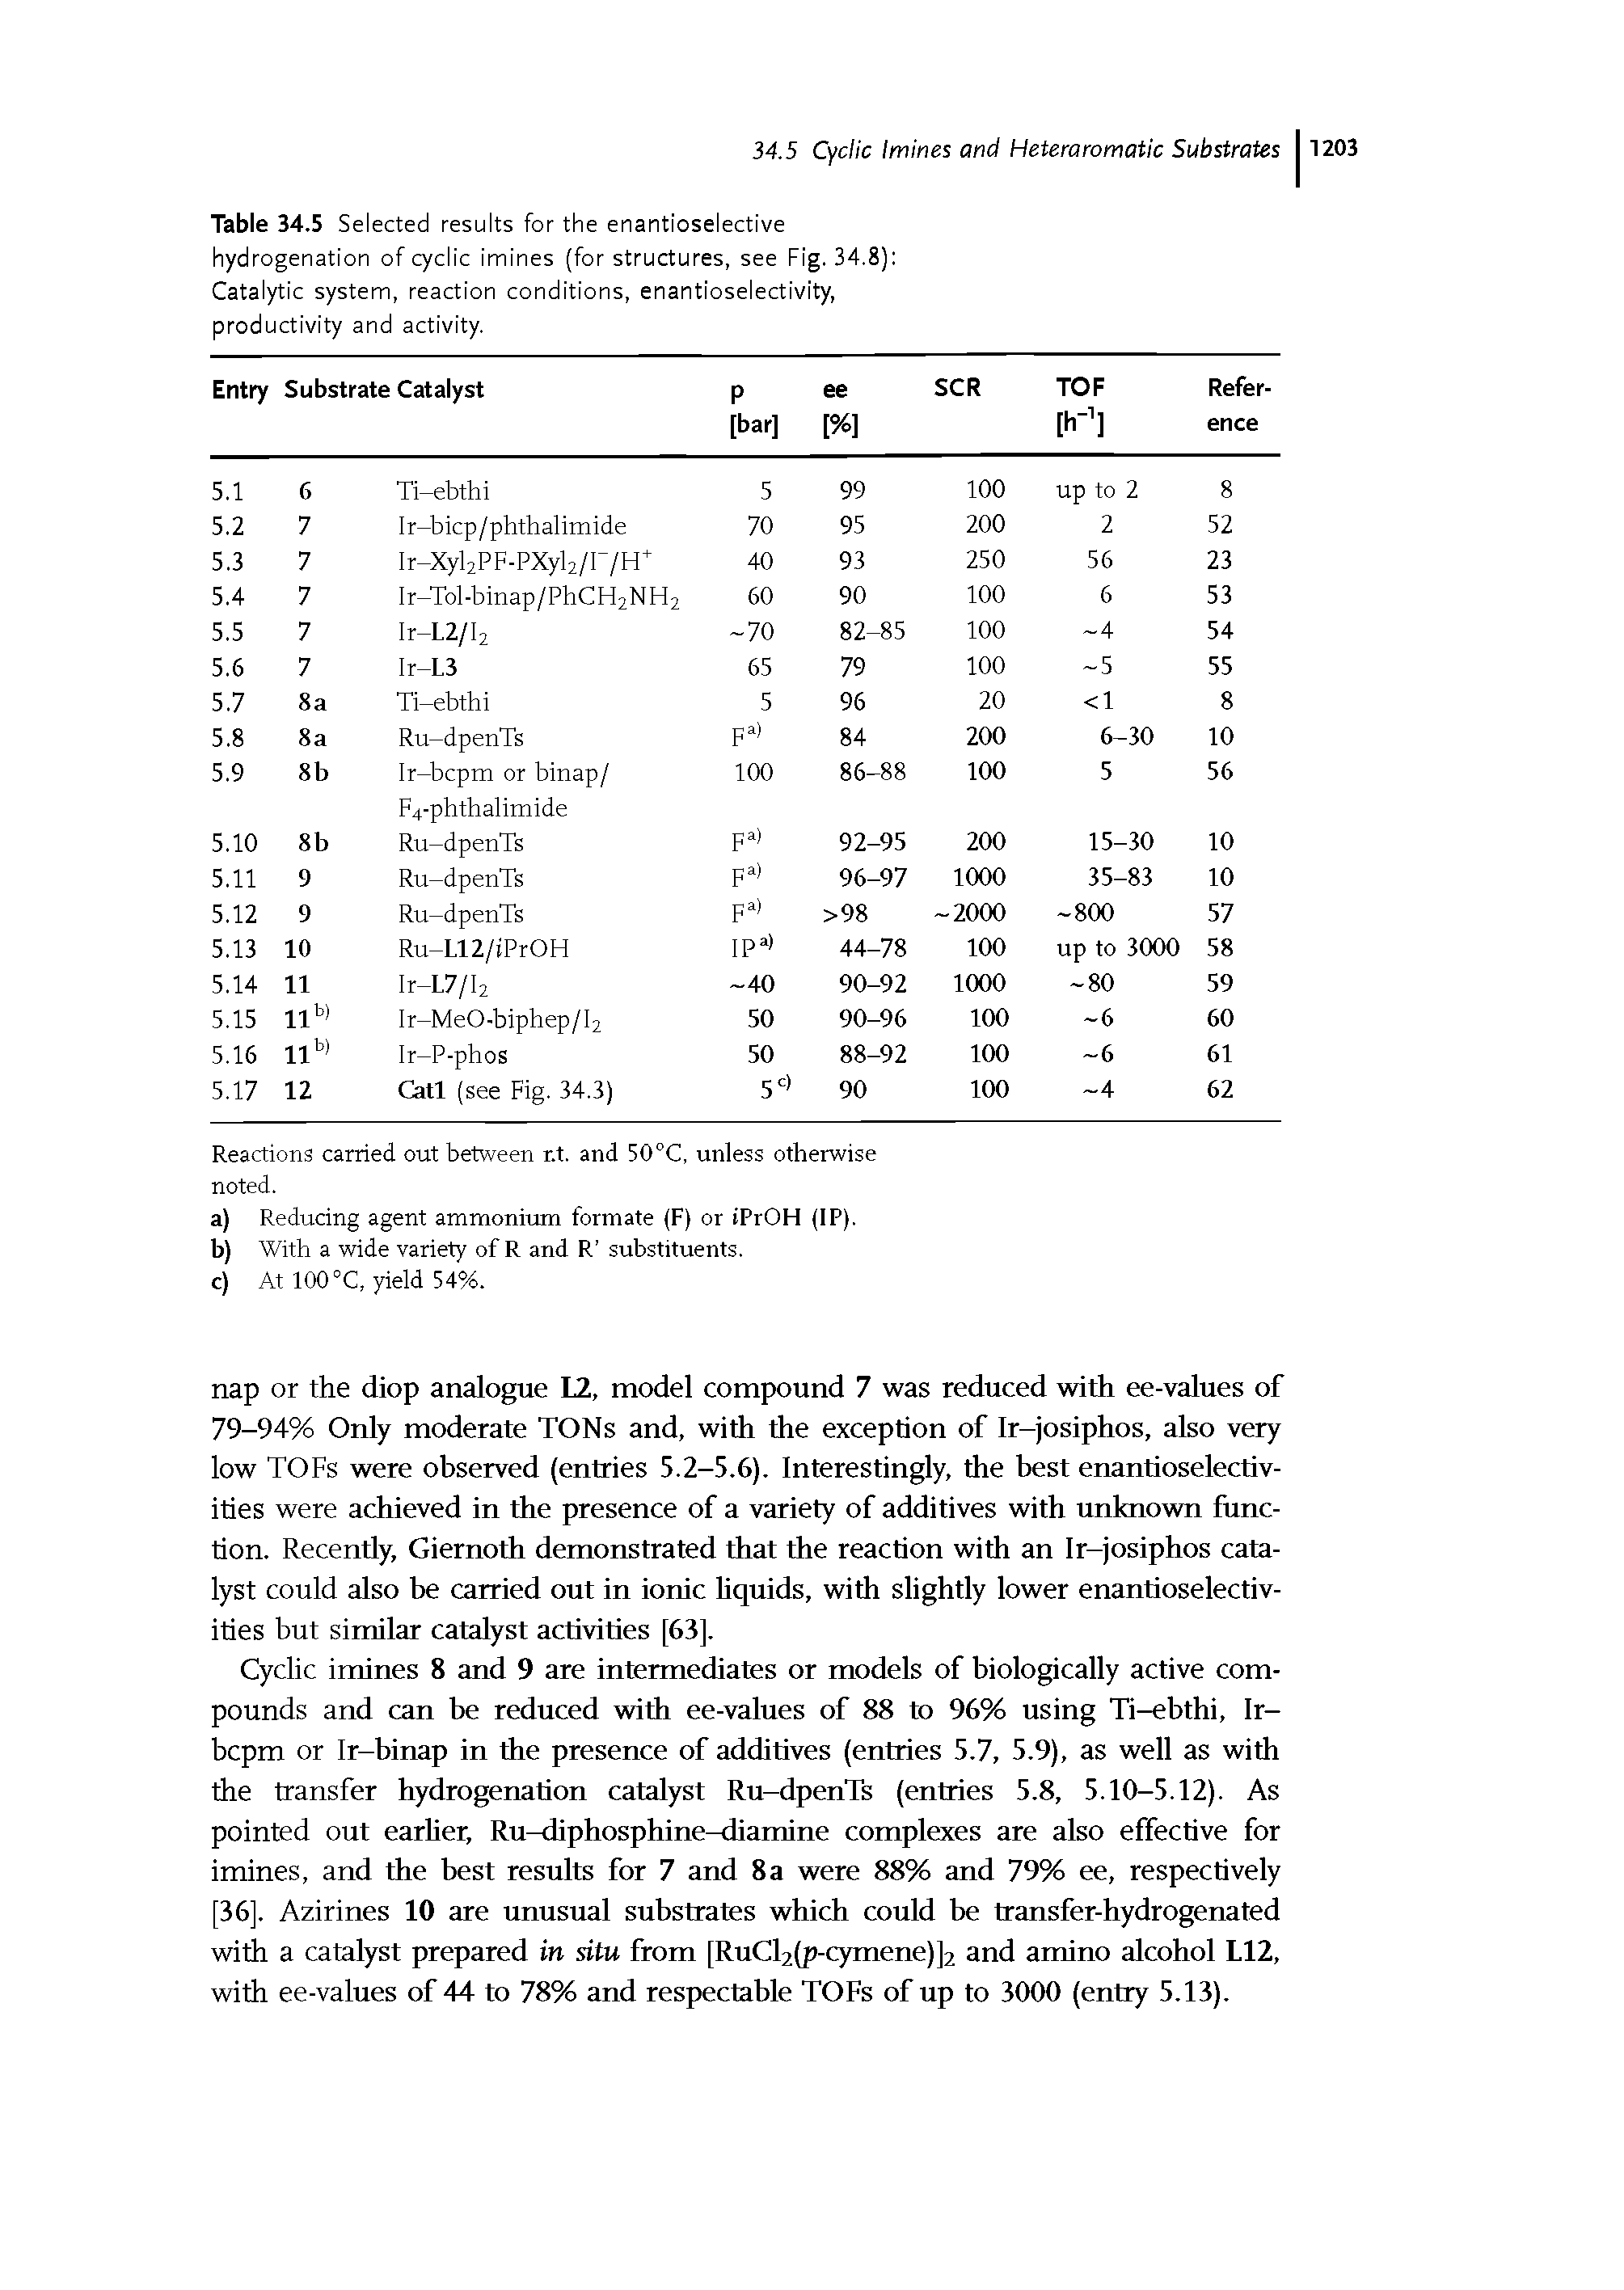 Table 34.5 Selected results for the enantioselective hydrogenation of cyclic imines (for structures, see Fig. 34.8) Catalytic system, reaction conditions, enantioselectivity, productivity and activity.